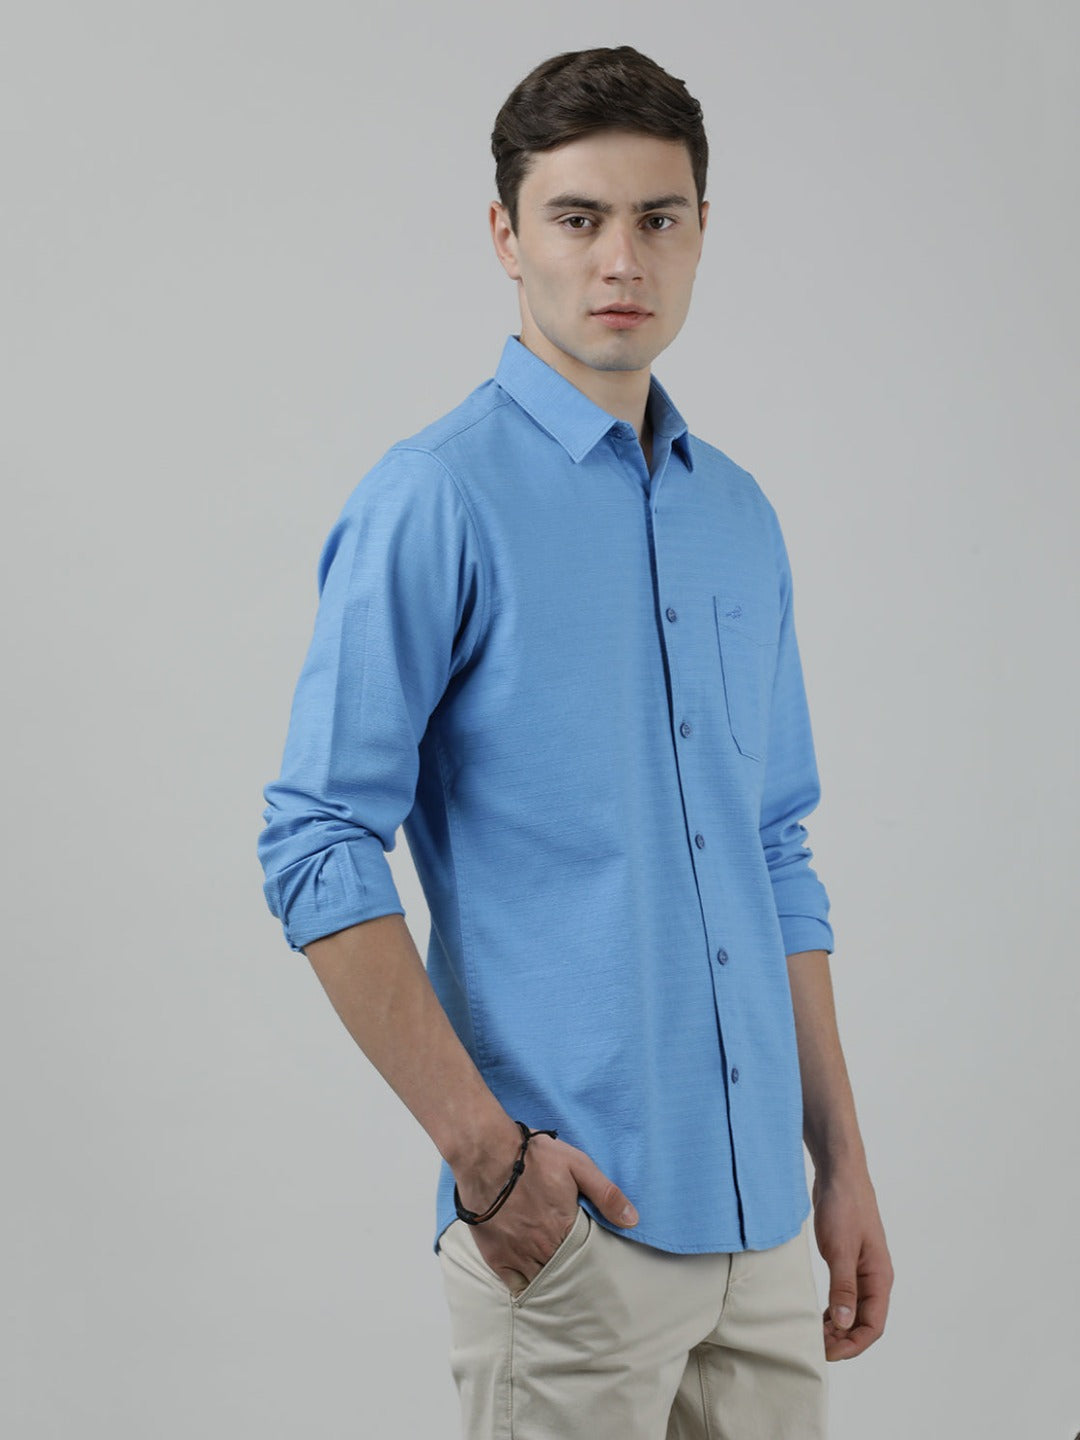 Casual Light Blue Full Sleeve Comfort Fit Solid Shirt with Collar for Men